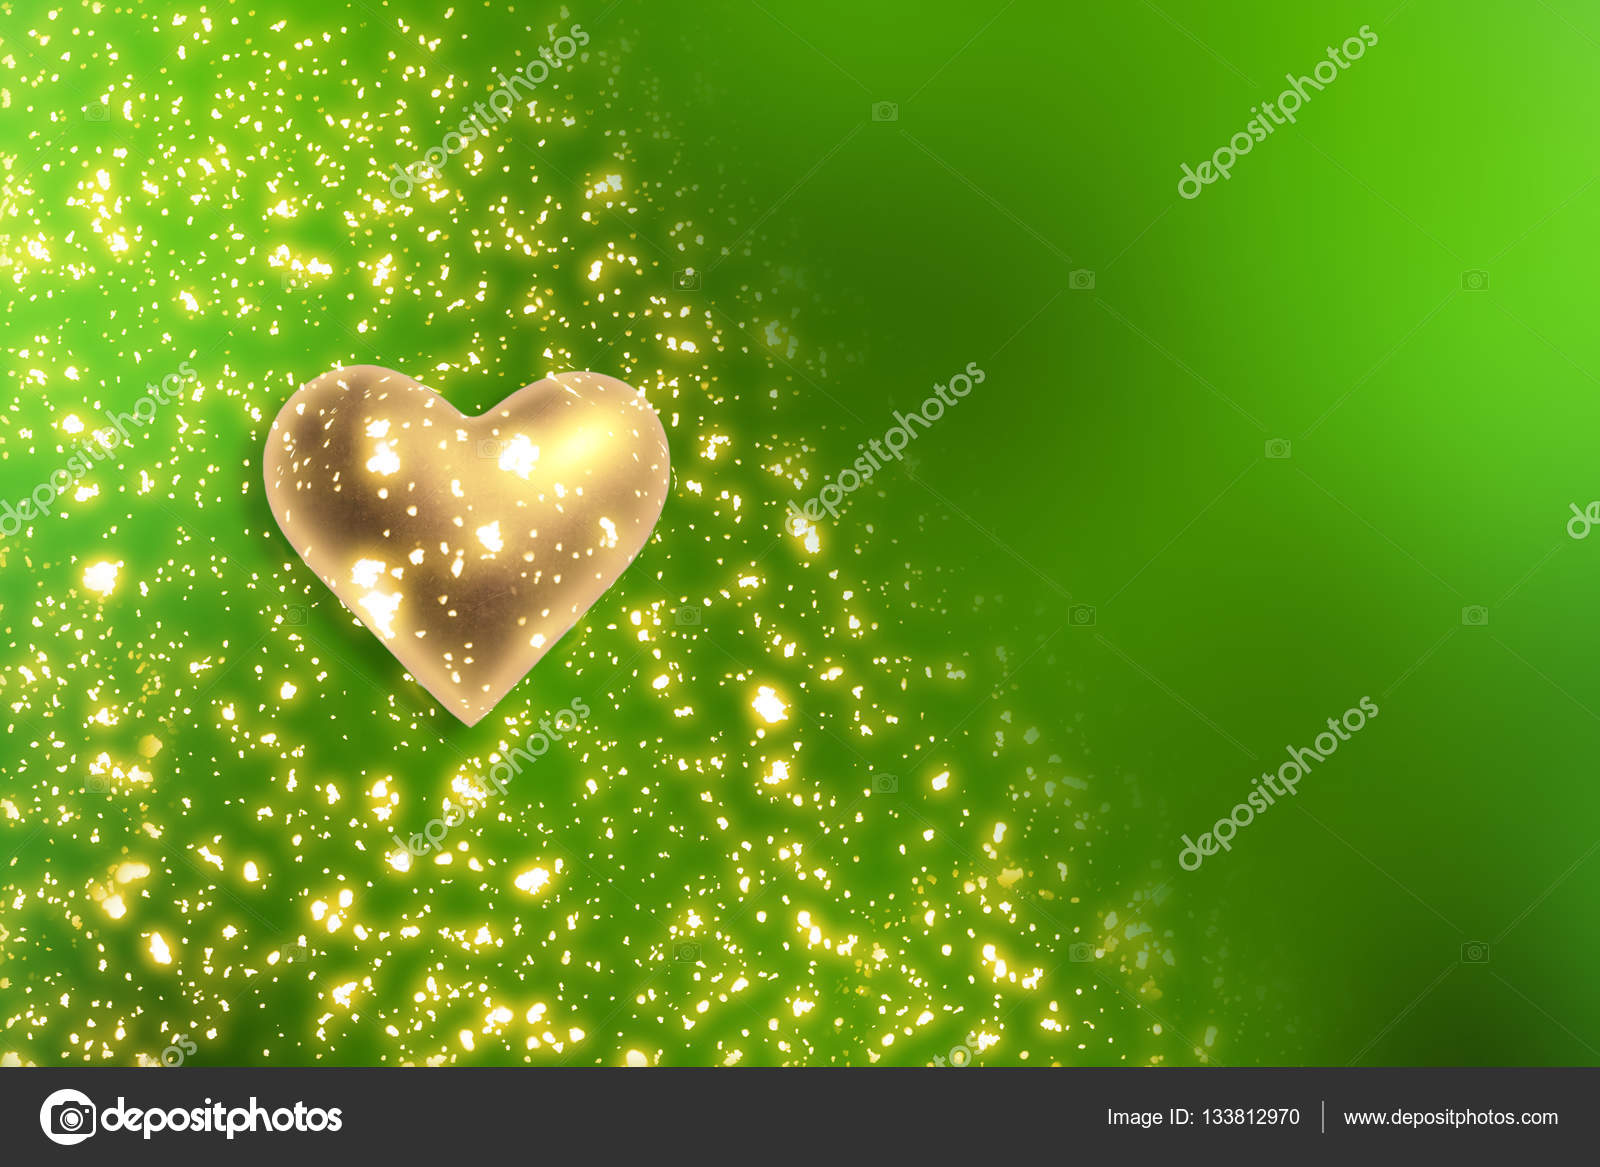 Green Christmas Background With Golden Heart And Glitter Or Bokeh Lights Round Defocused Particles Stock Photo C Vakhitovstock